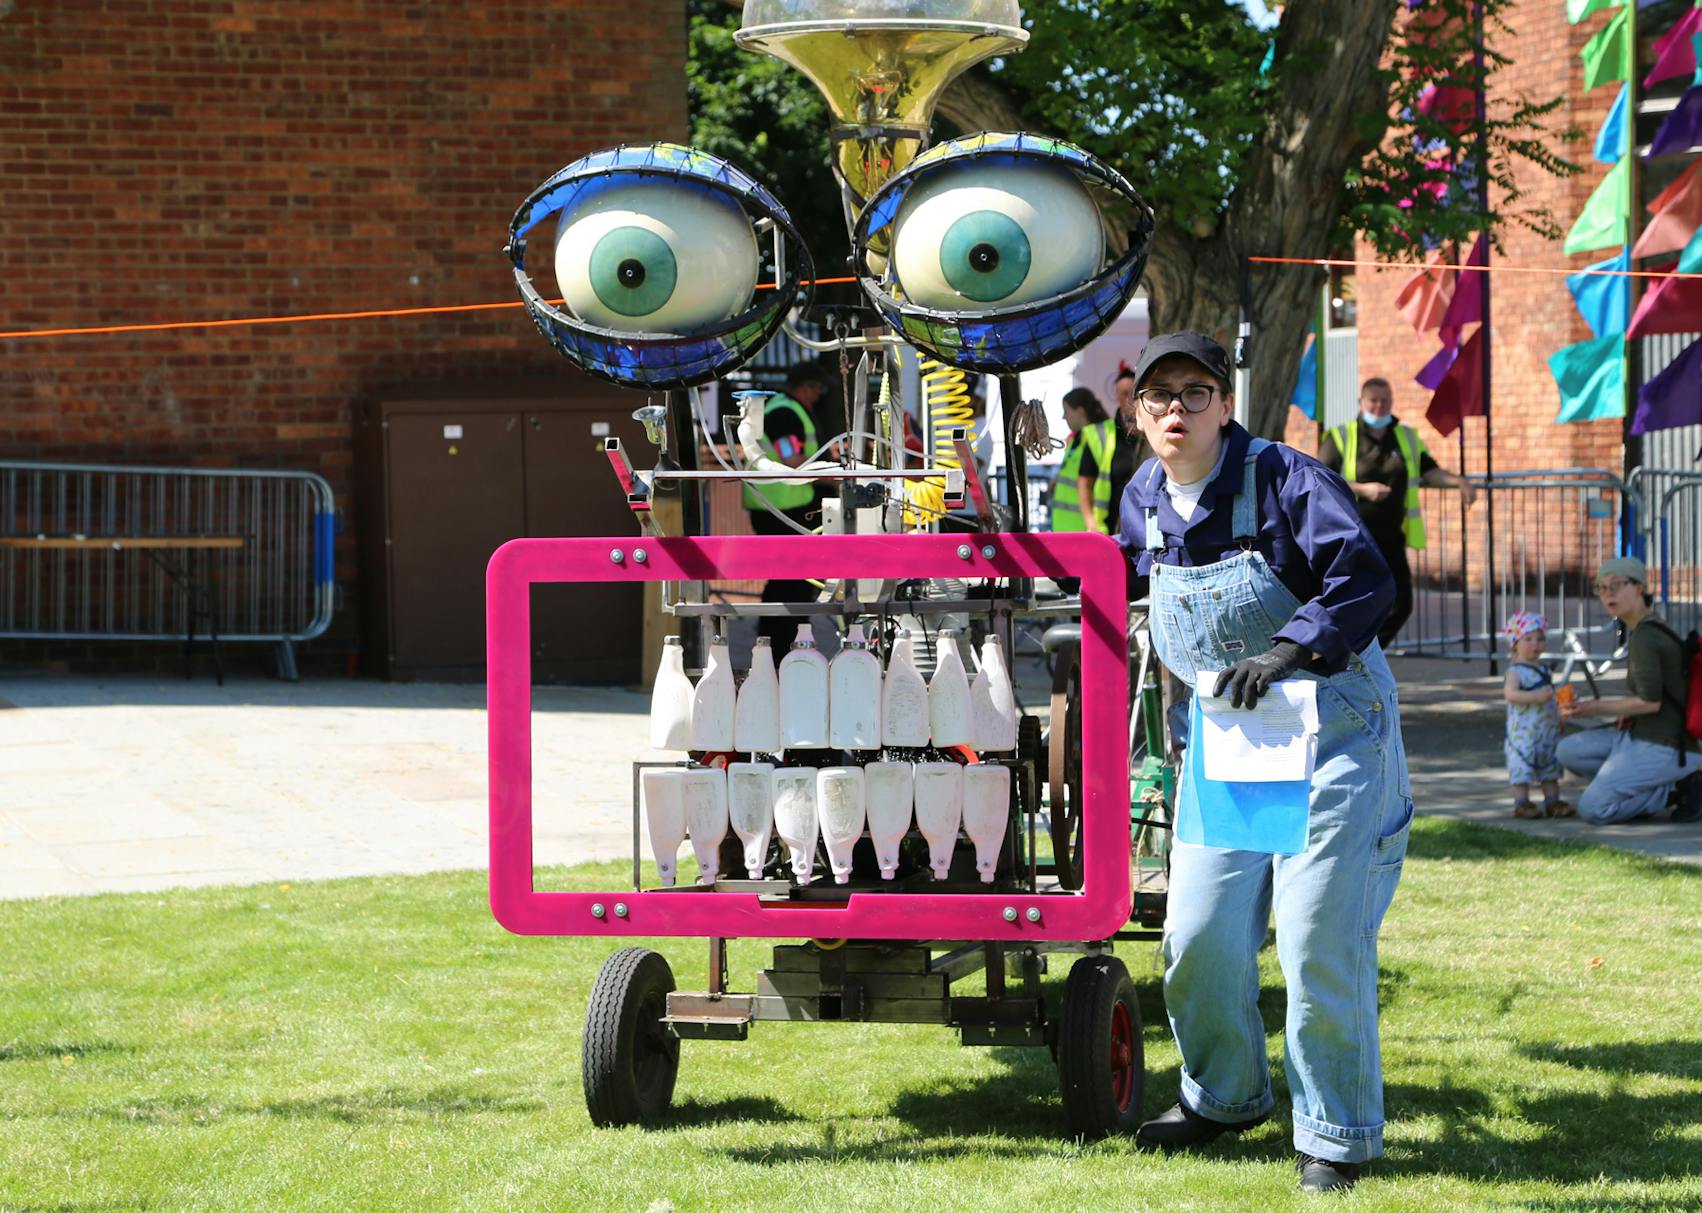 A performer in dungarees stands beside a large machine with bottles for teeth and large eyes